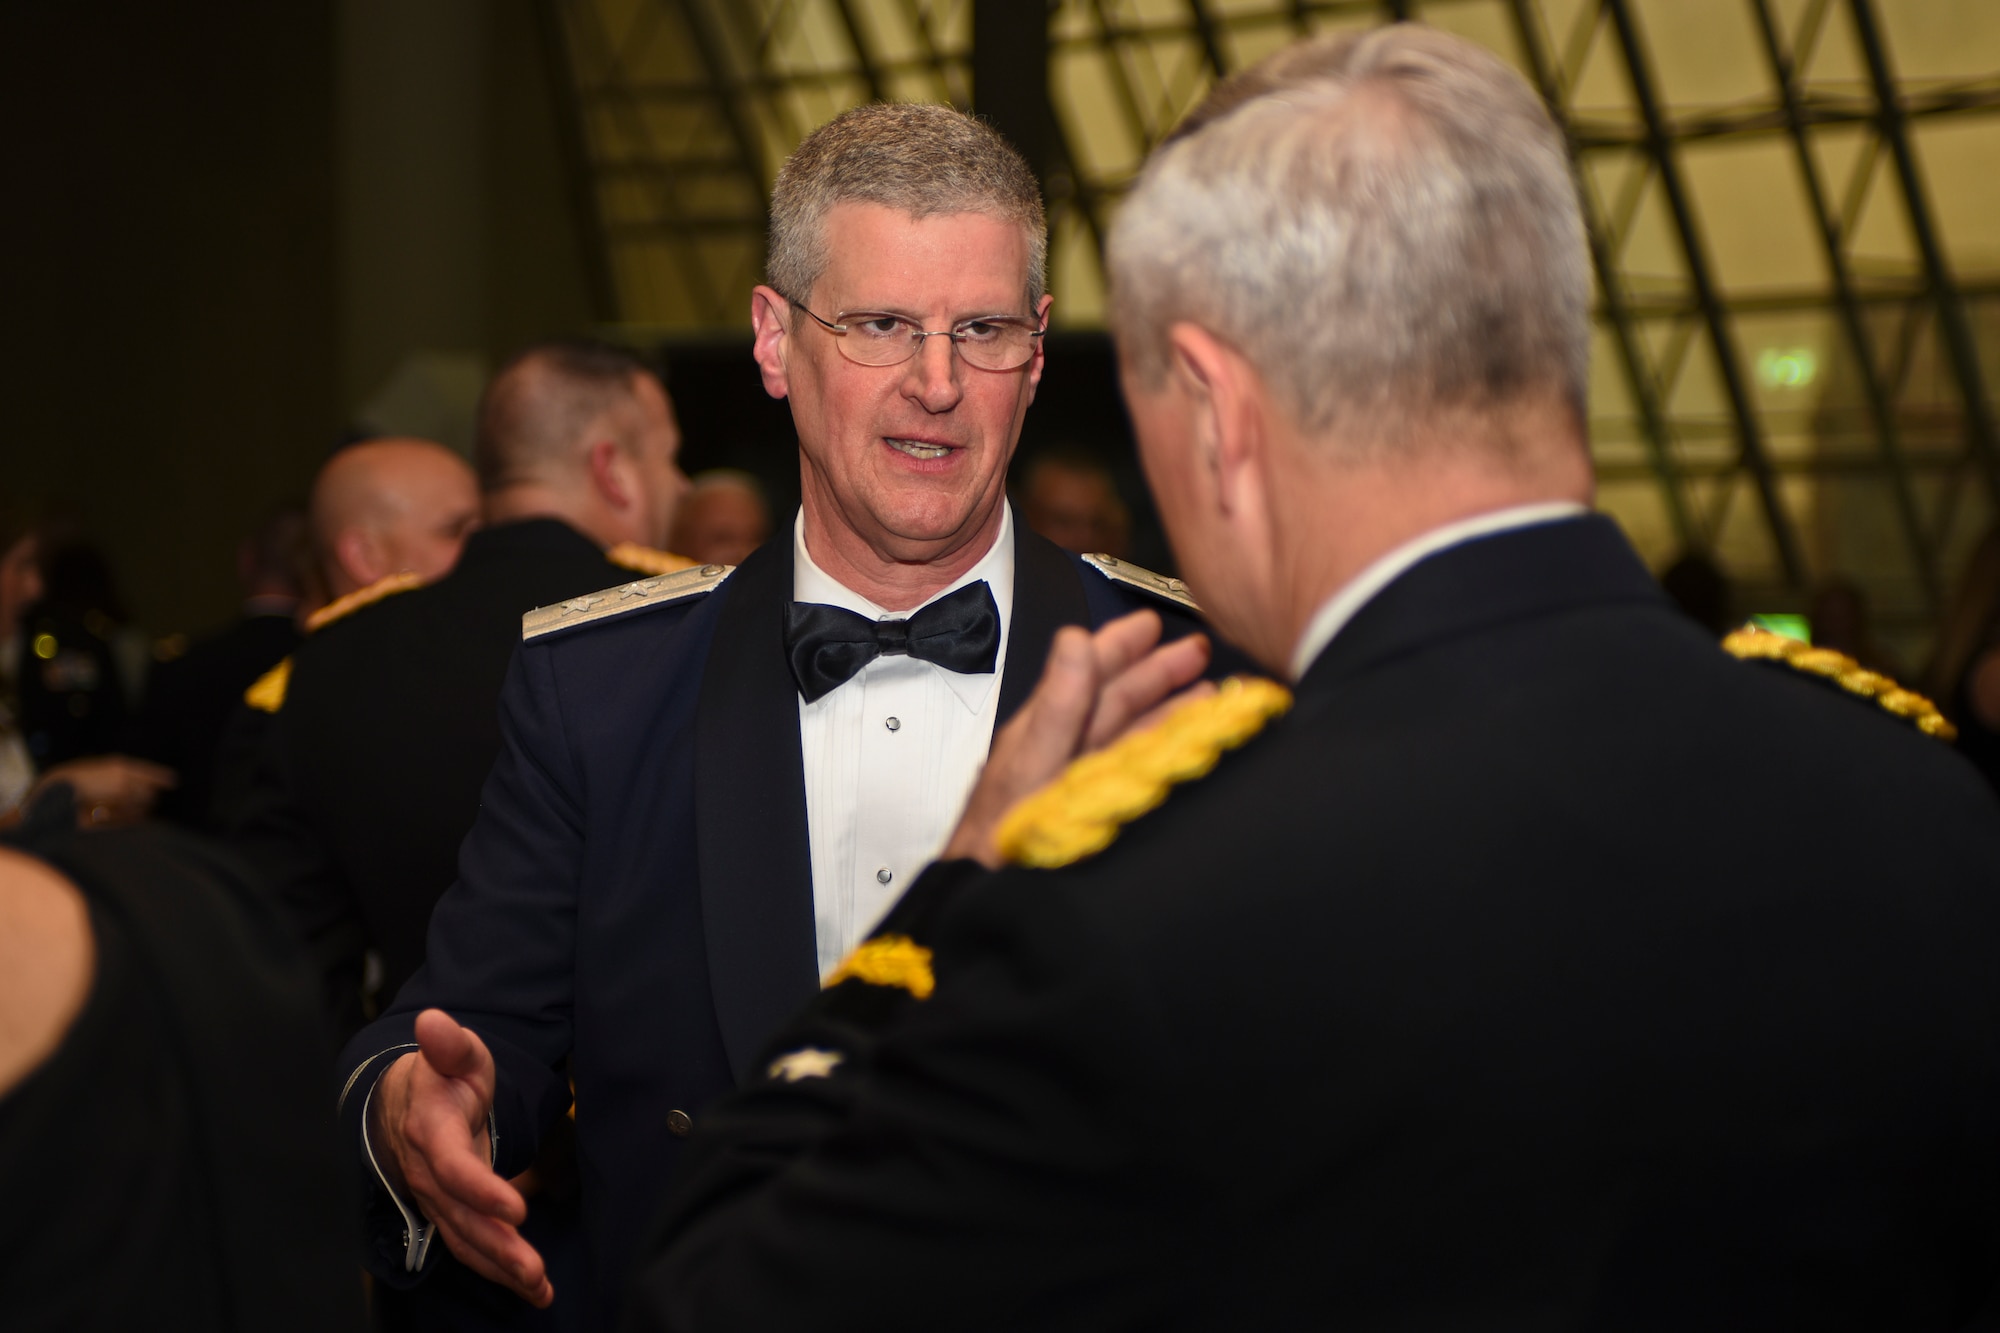 U.S. Air Force Maj. Gen. Mark E. Bartman (left), Ohio adjutant general, speaks with U.S. Army Gen. Frank J. Grass (right), Chief of the National Guard Bureau, prior to the Ohio National Guard Association and Ohio National Guard Enlisted Association Spring Dinner Dance, Columbus, Ohio, April 25, 2015. Gen. Grass was the guest speaker at the event which is held annually for association members in both the Air and Army National Guard. (U.S. National Guard photo by Senior Airman Wendy Kuhn/Released)